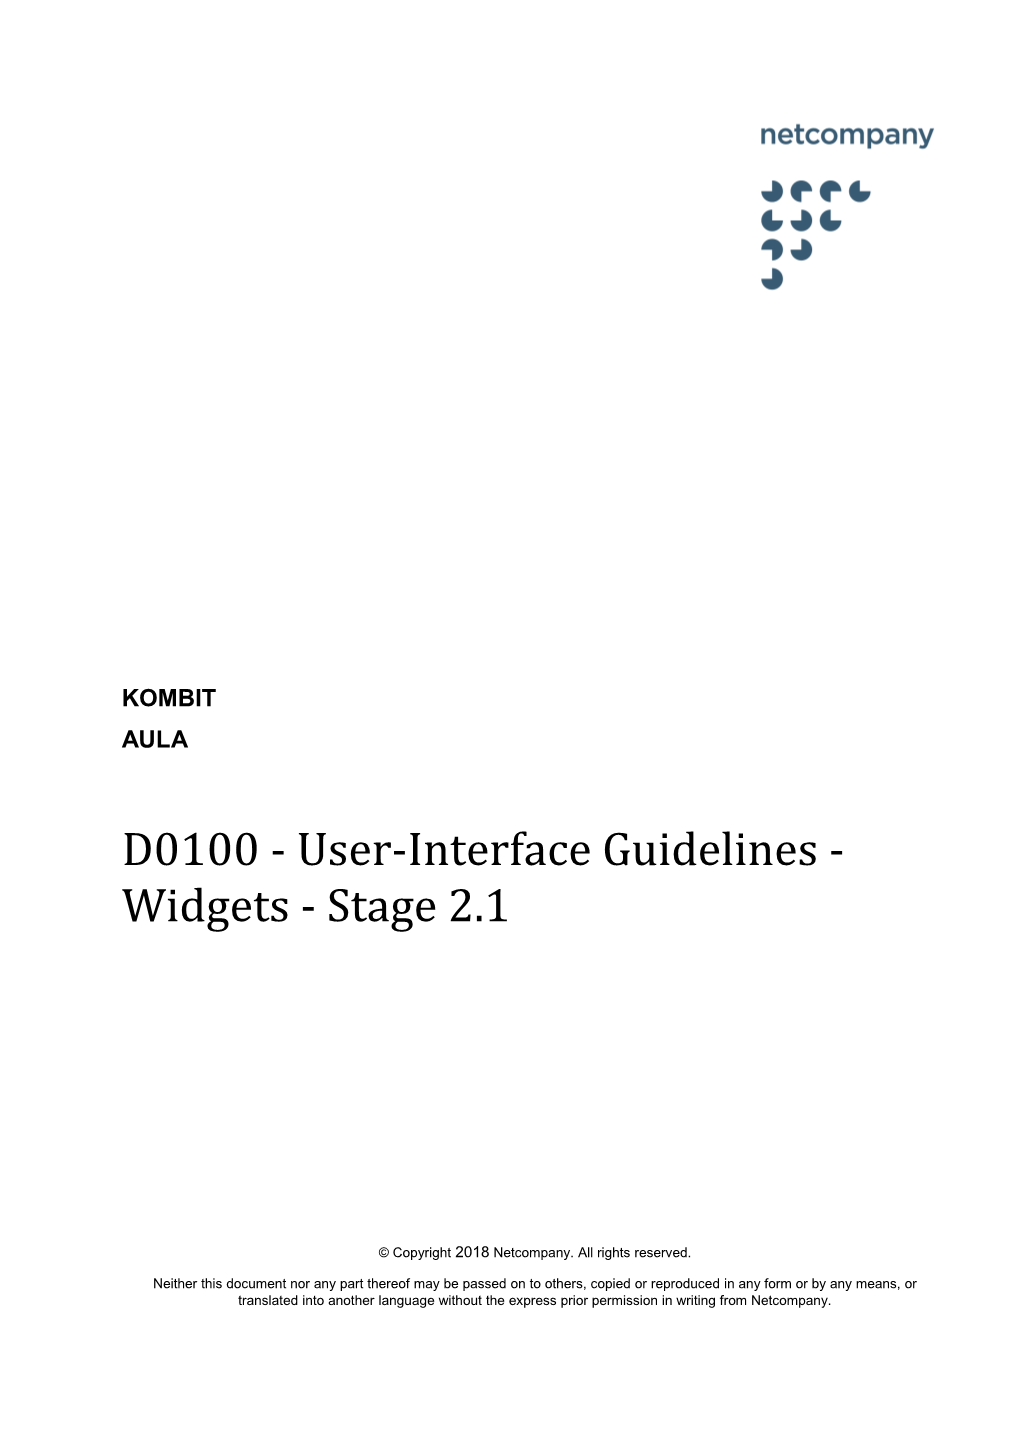 D0100 - User-Interface Guidelines - Widgets - Stage 2.1